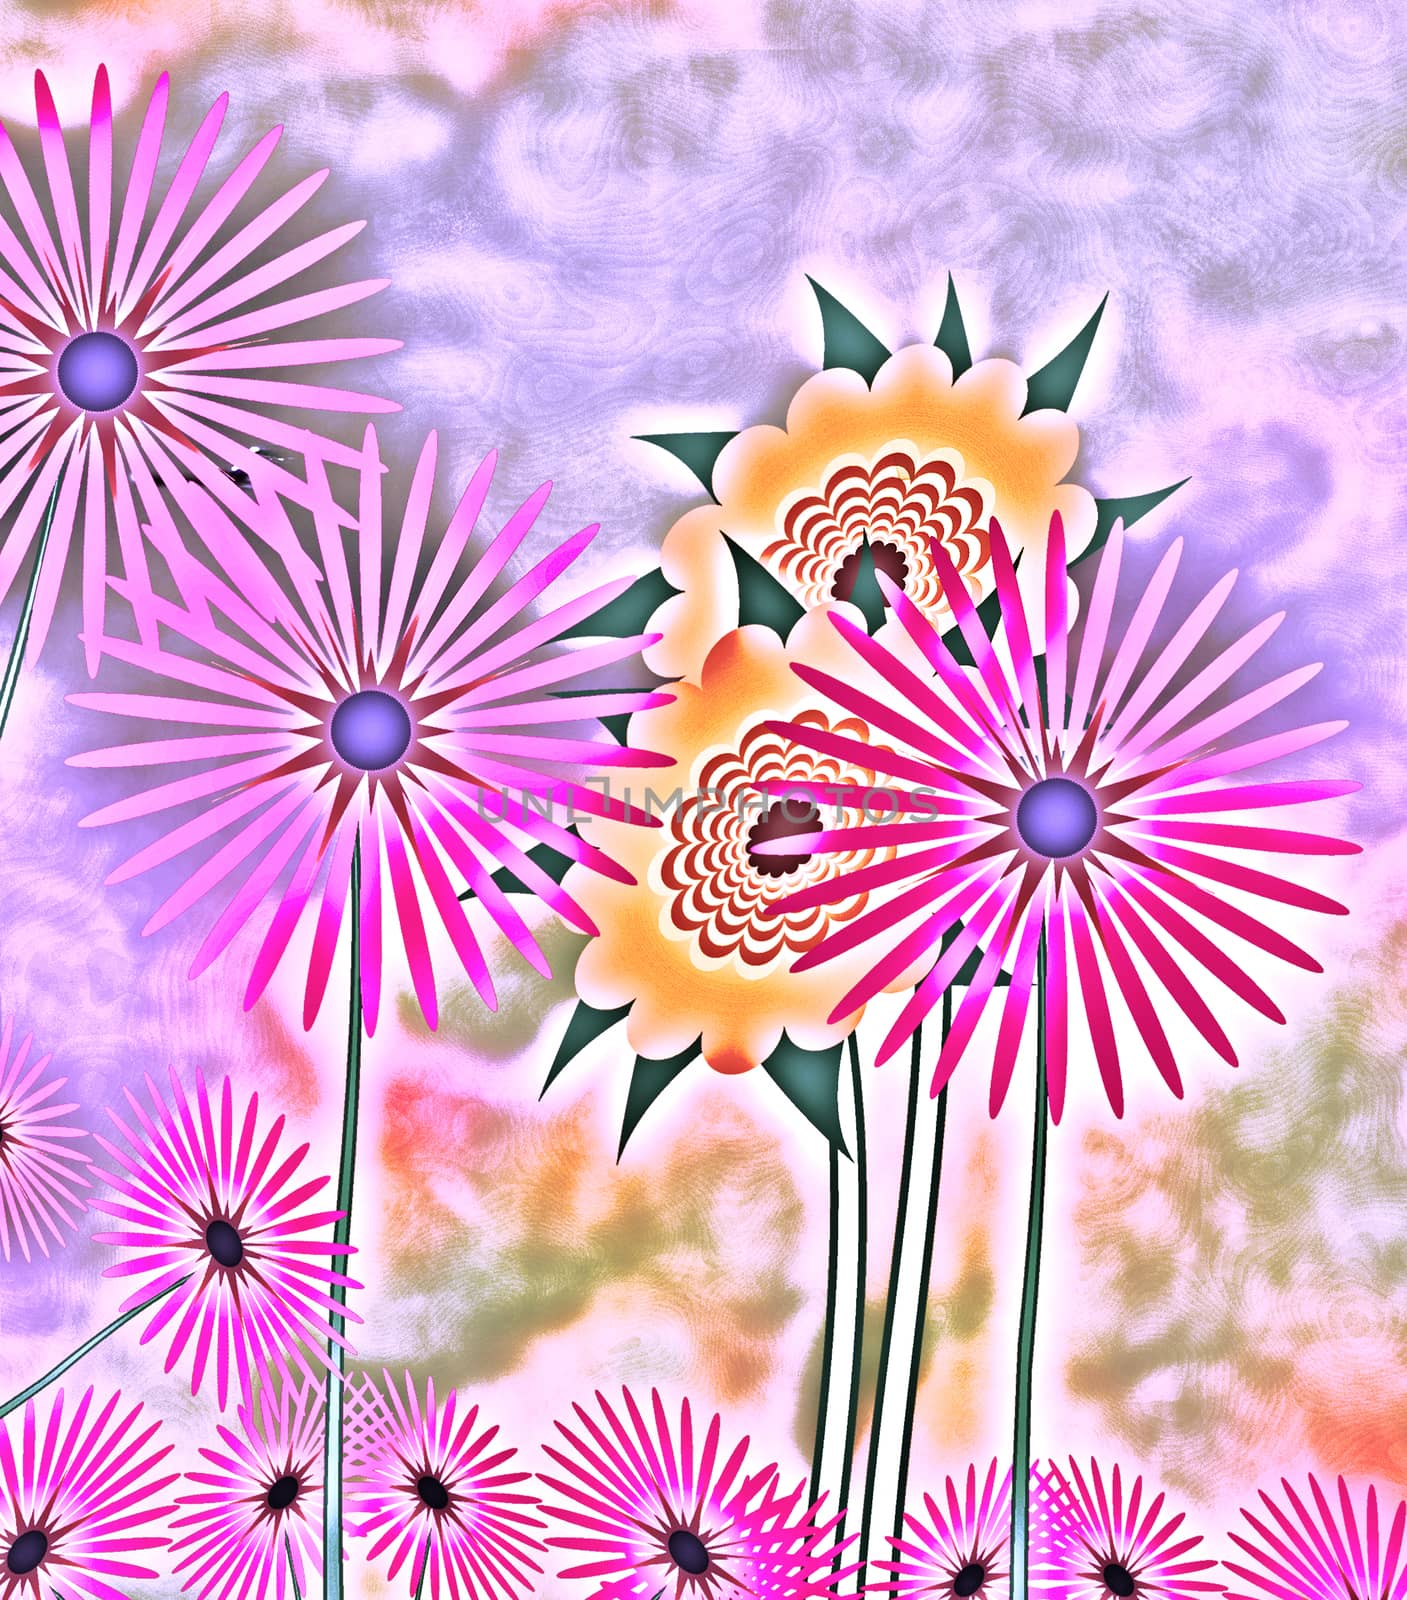 Abstract Spring Flowers by sherj